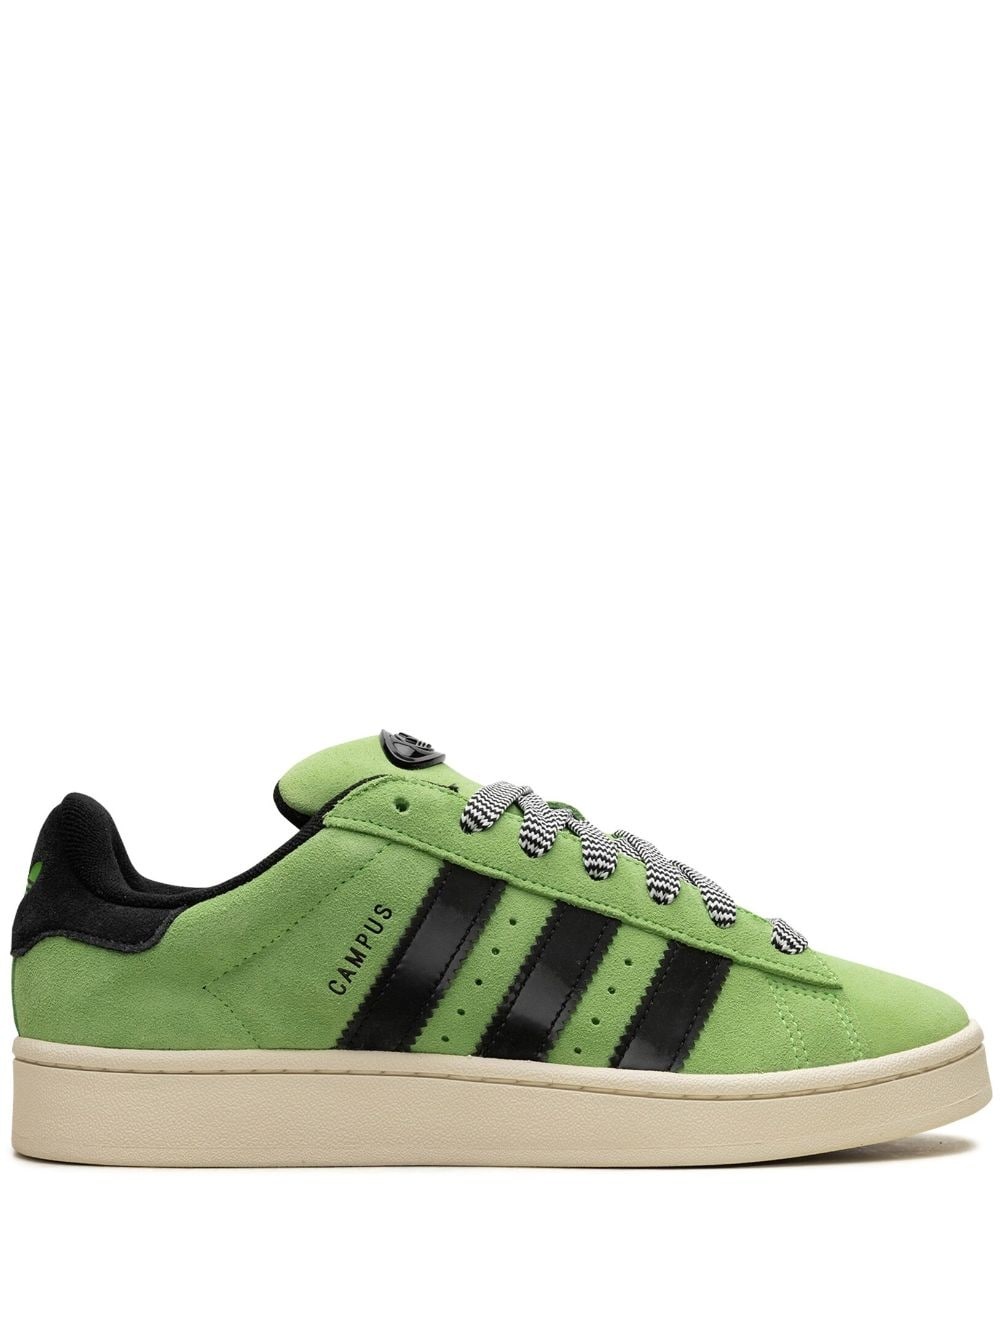 Campus 00s "Solar Green" sneakers - 1